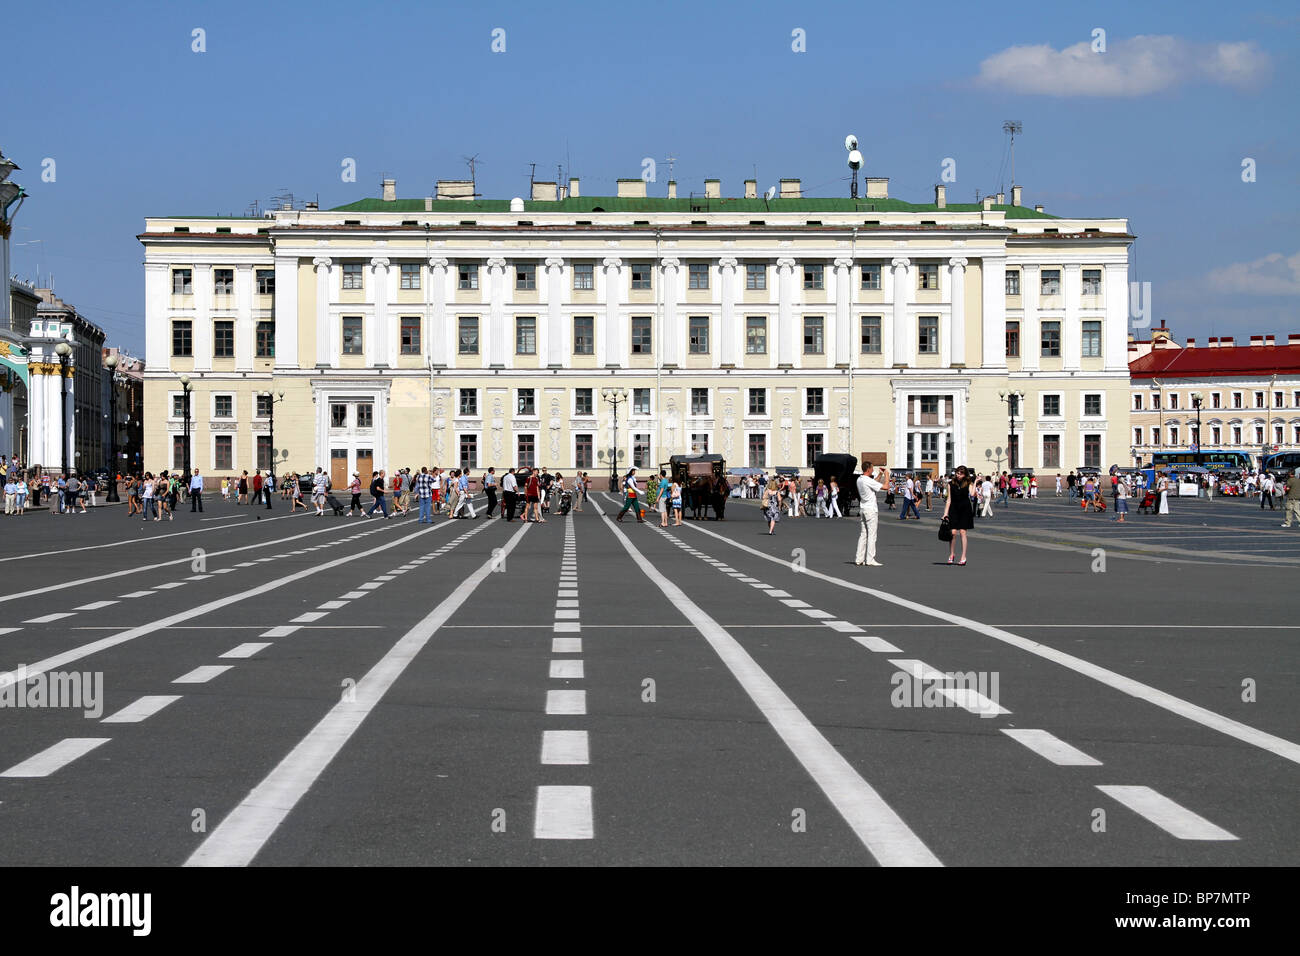 The Guards Headquarters on Palace Square in St. Petersburg, Russia Stock Photo